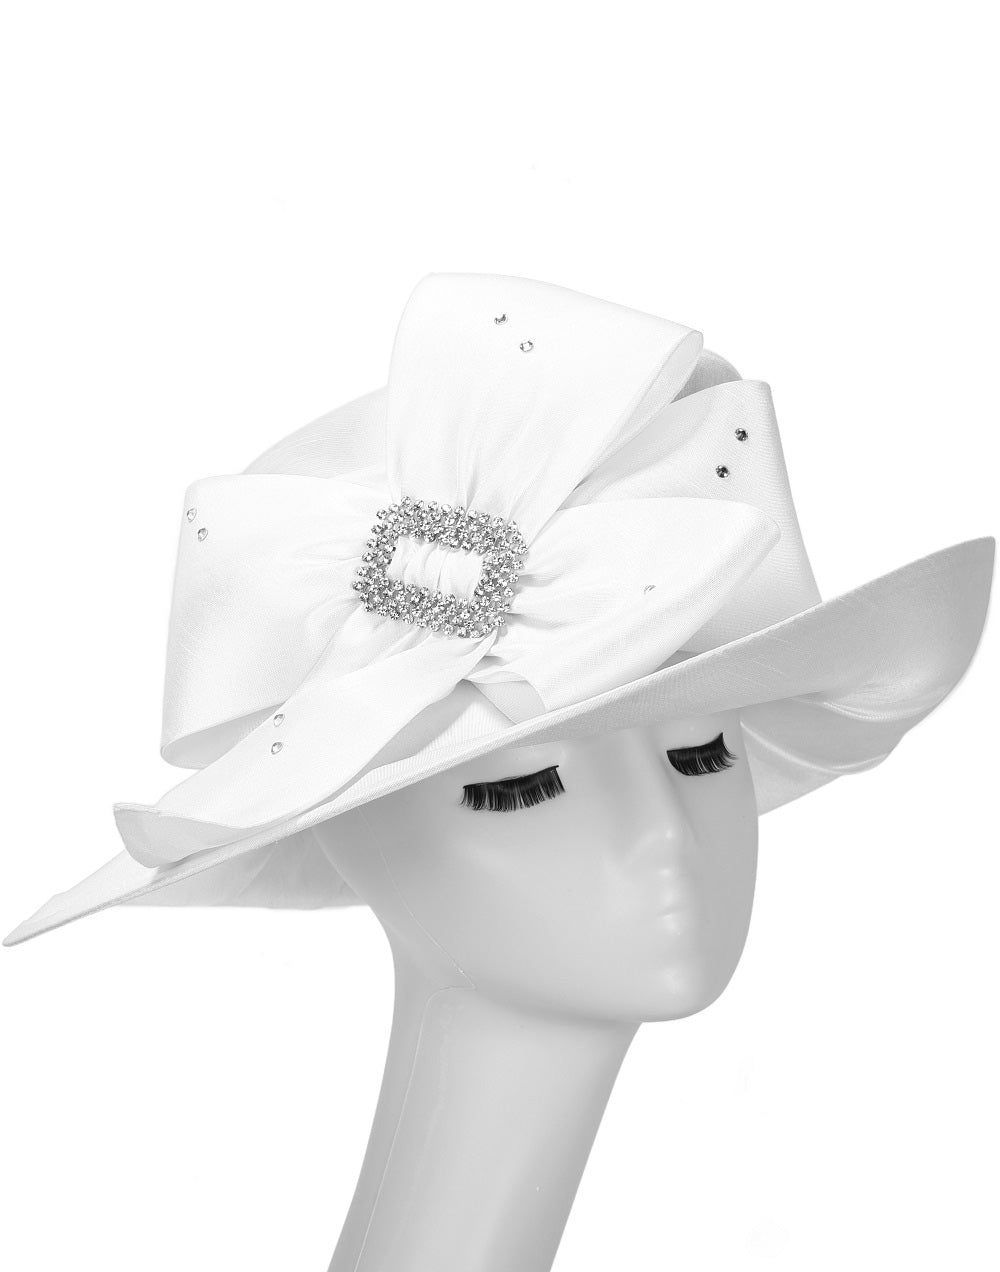 Giovanna Church Hat HG1103-White - Church Suits For Less